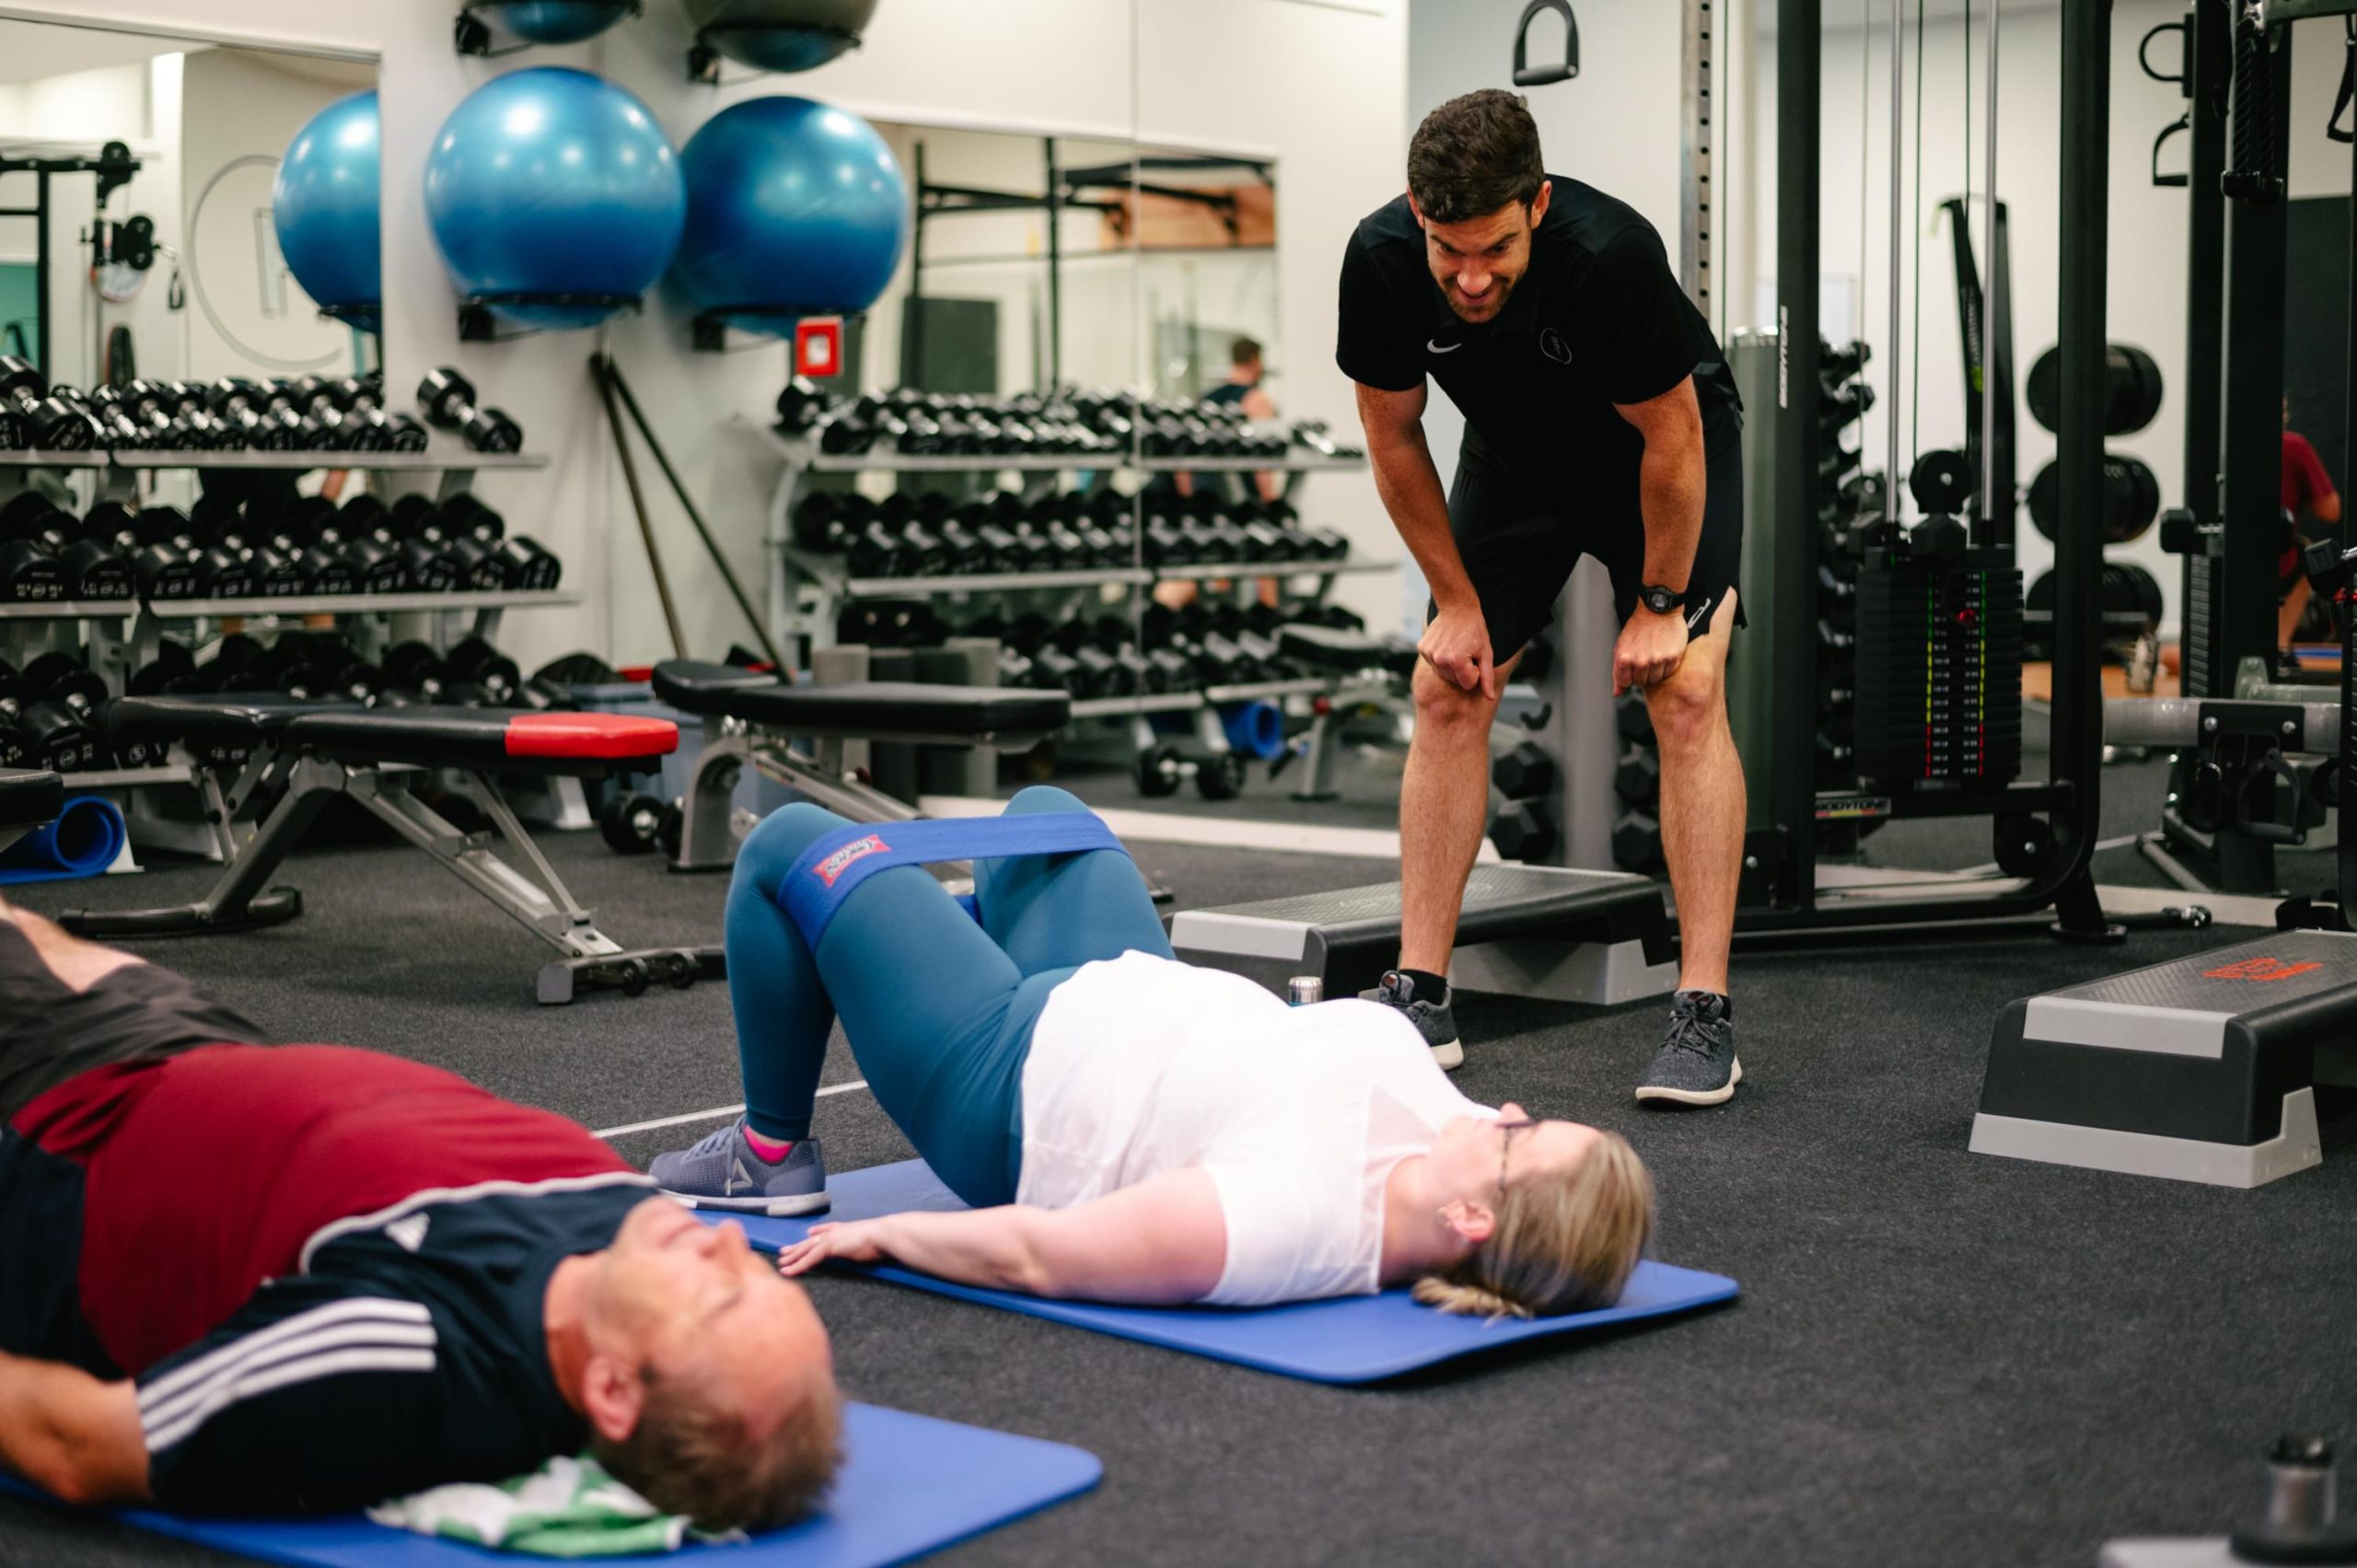 Friendly personal trainers play a vital role in fostering client motivation